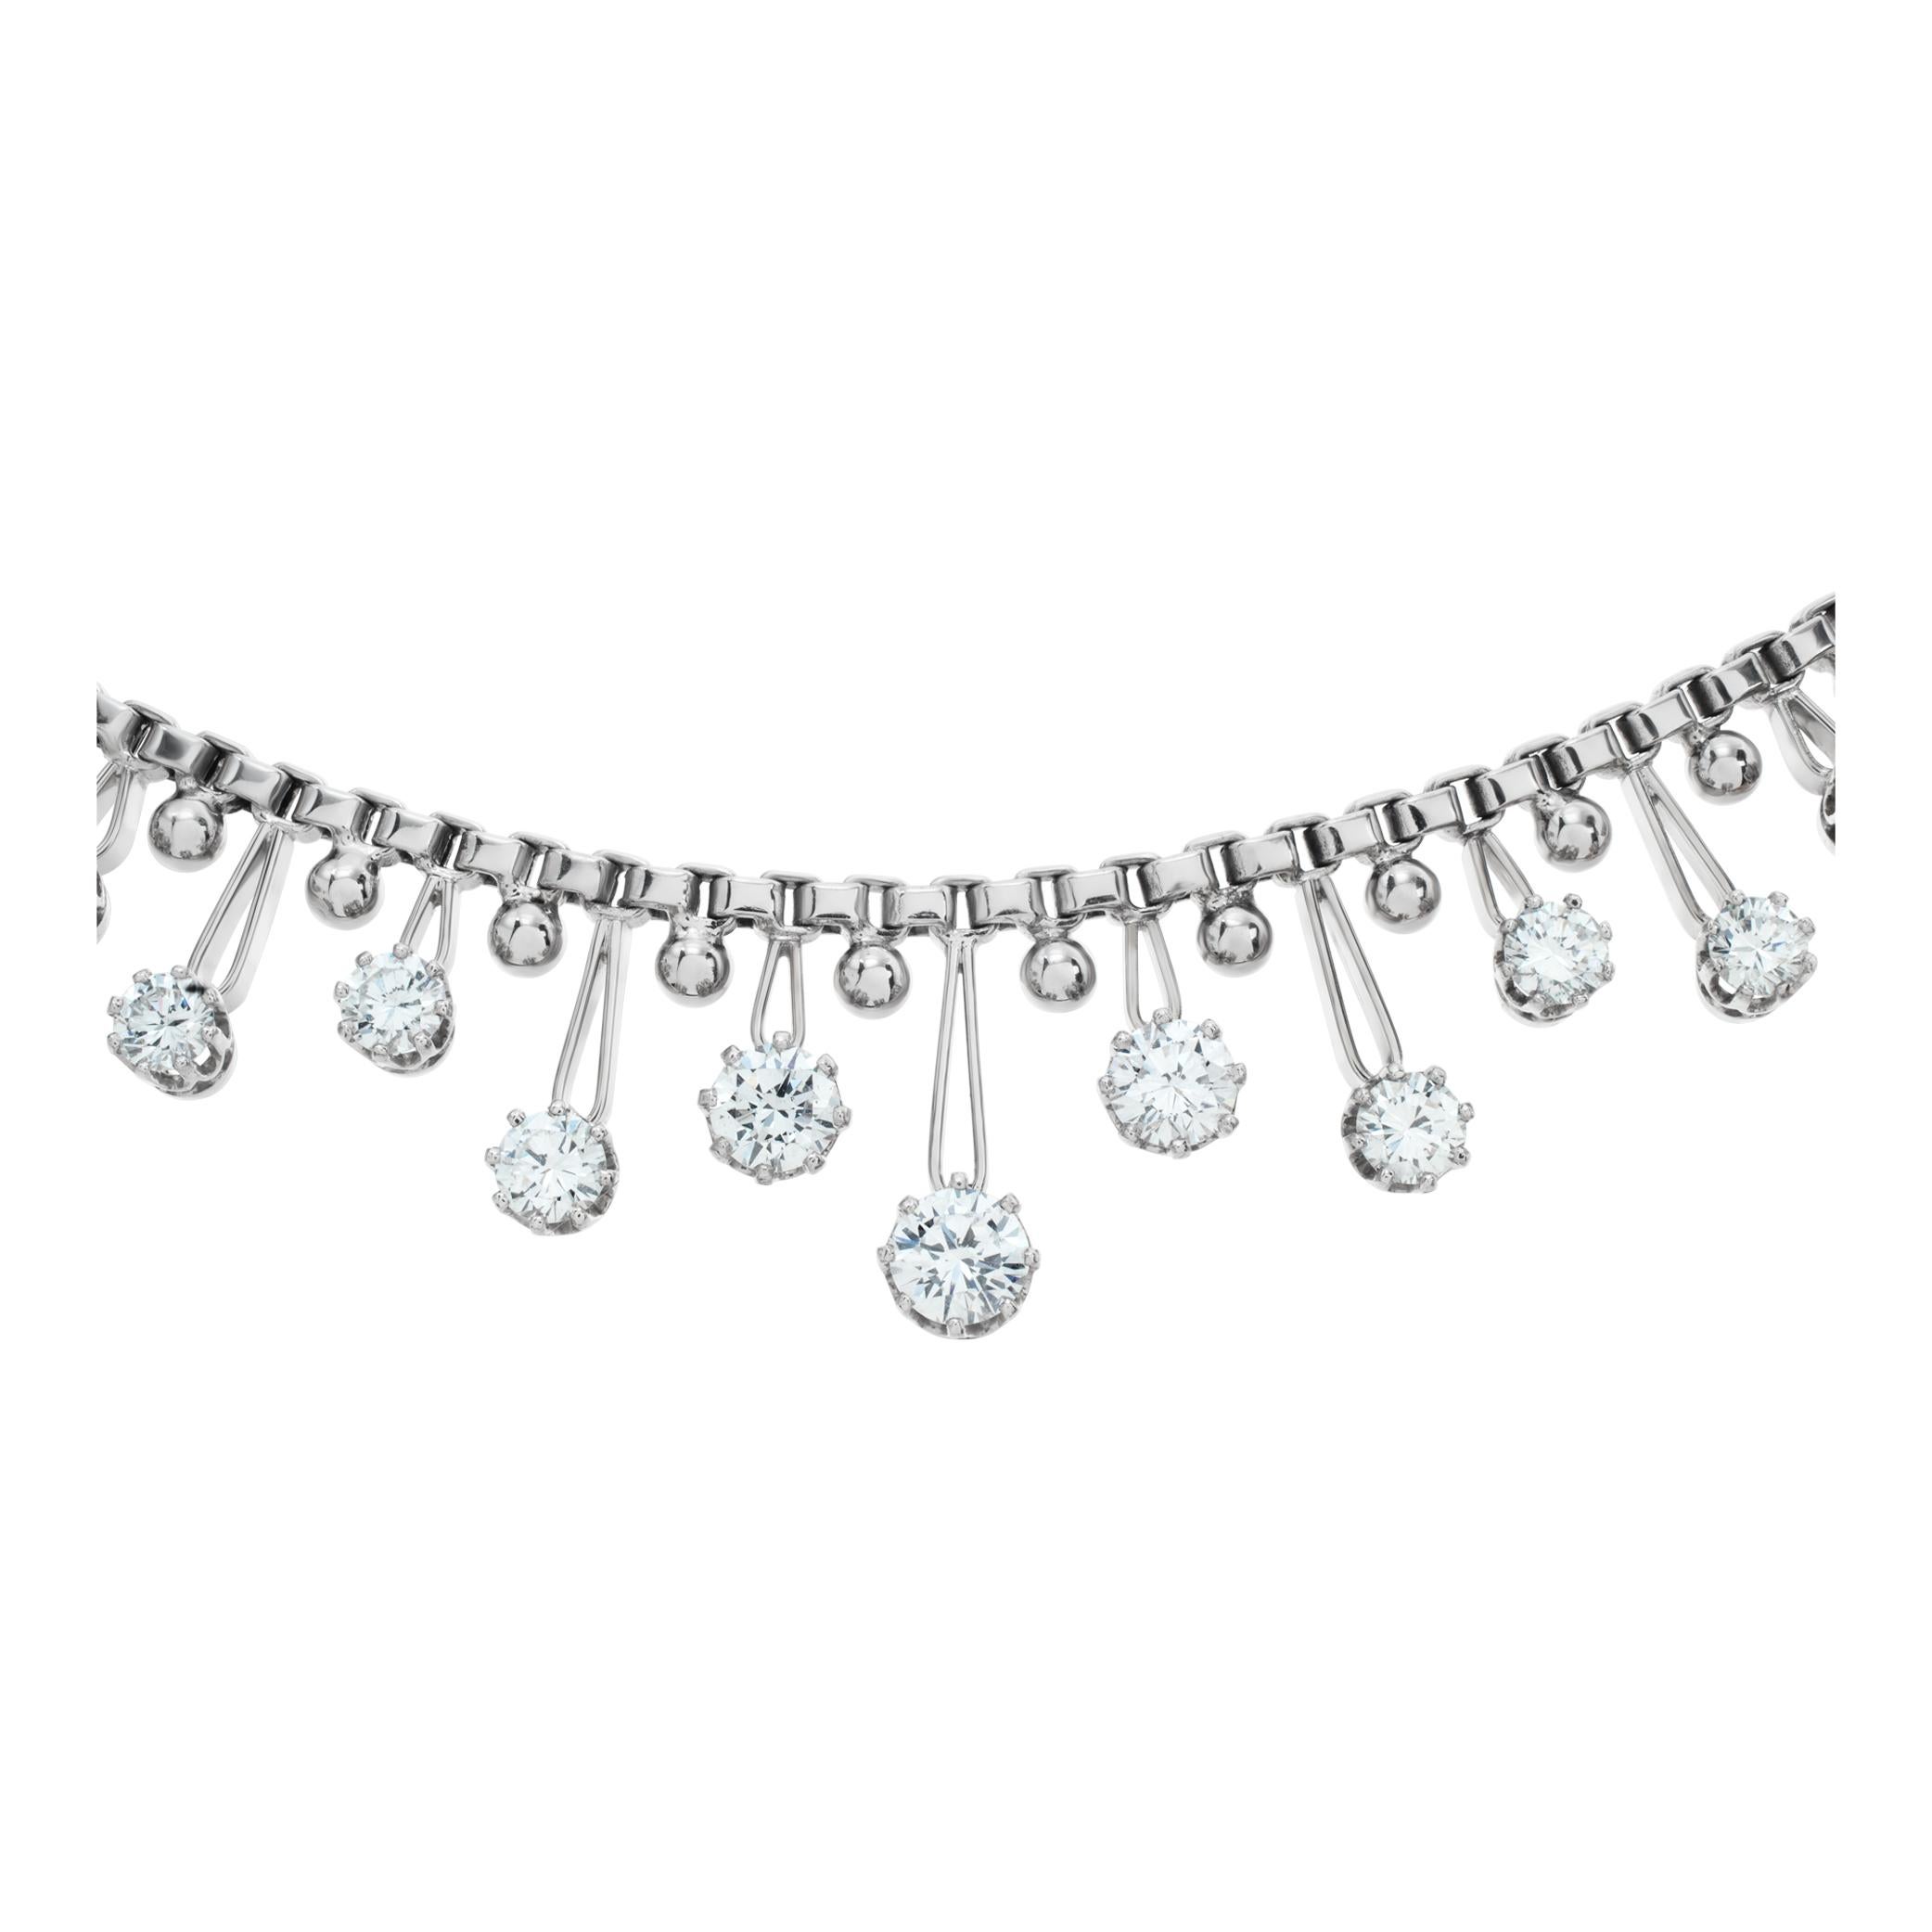 Diamonds necklace in 18K white gold. Round brilliant cut diamond total approx. weight: 7.00 carats, diamonds estimate: G-H Color, VS Clarity.  Front hanging length: 0.50 inch. Total length: 17.50 inches.